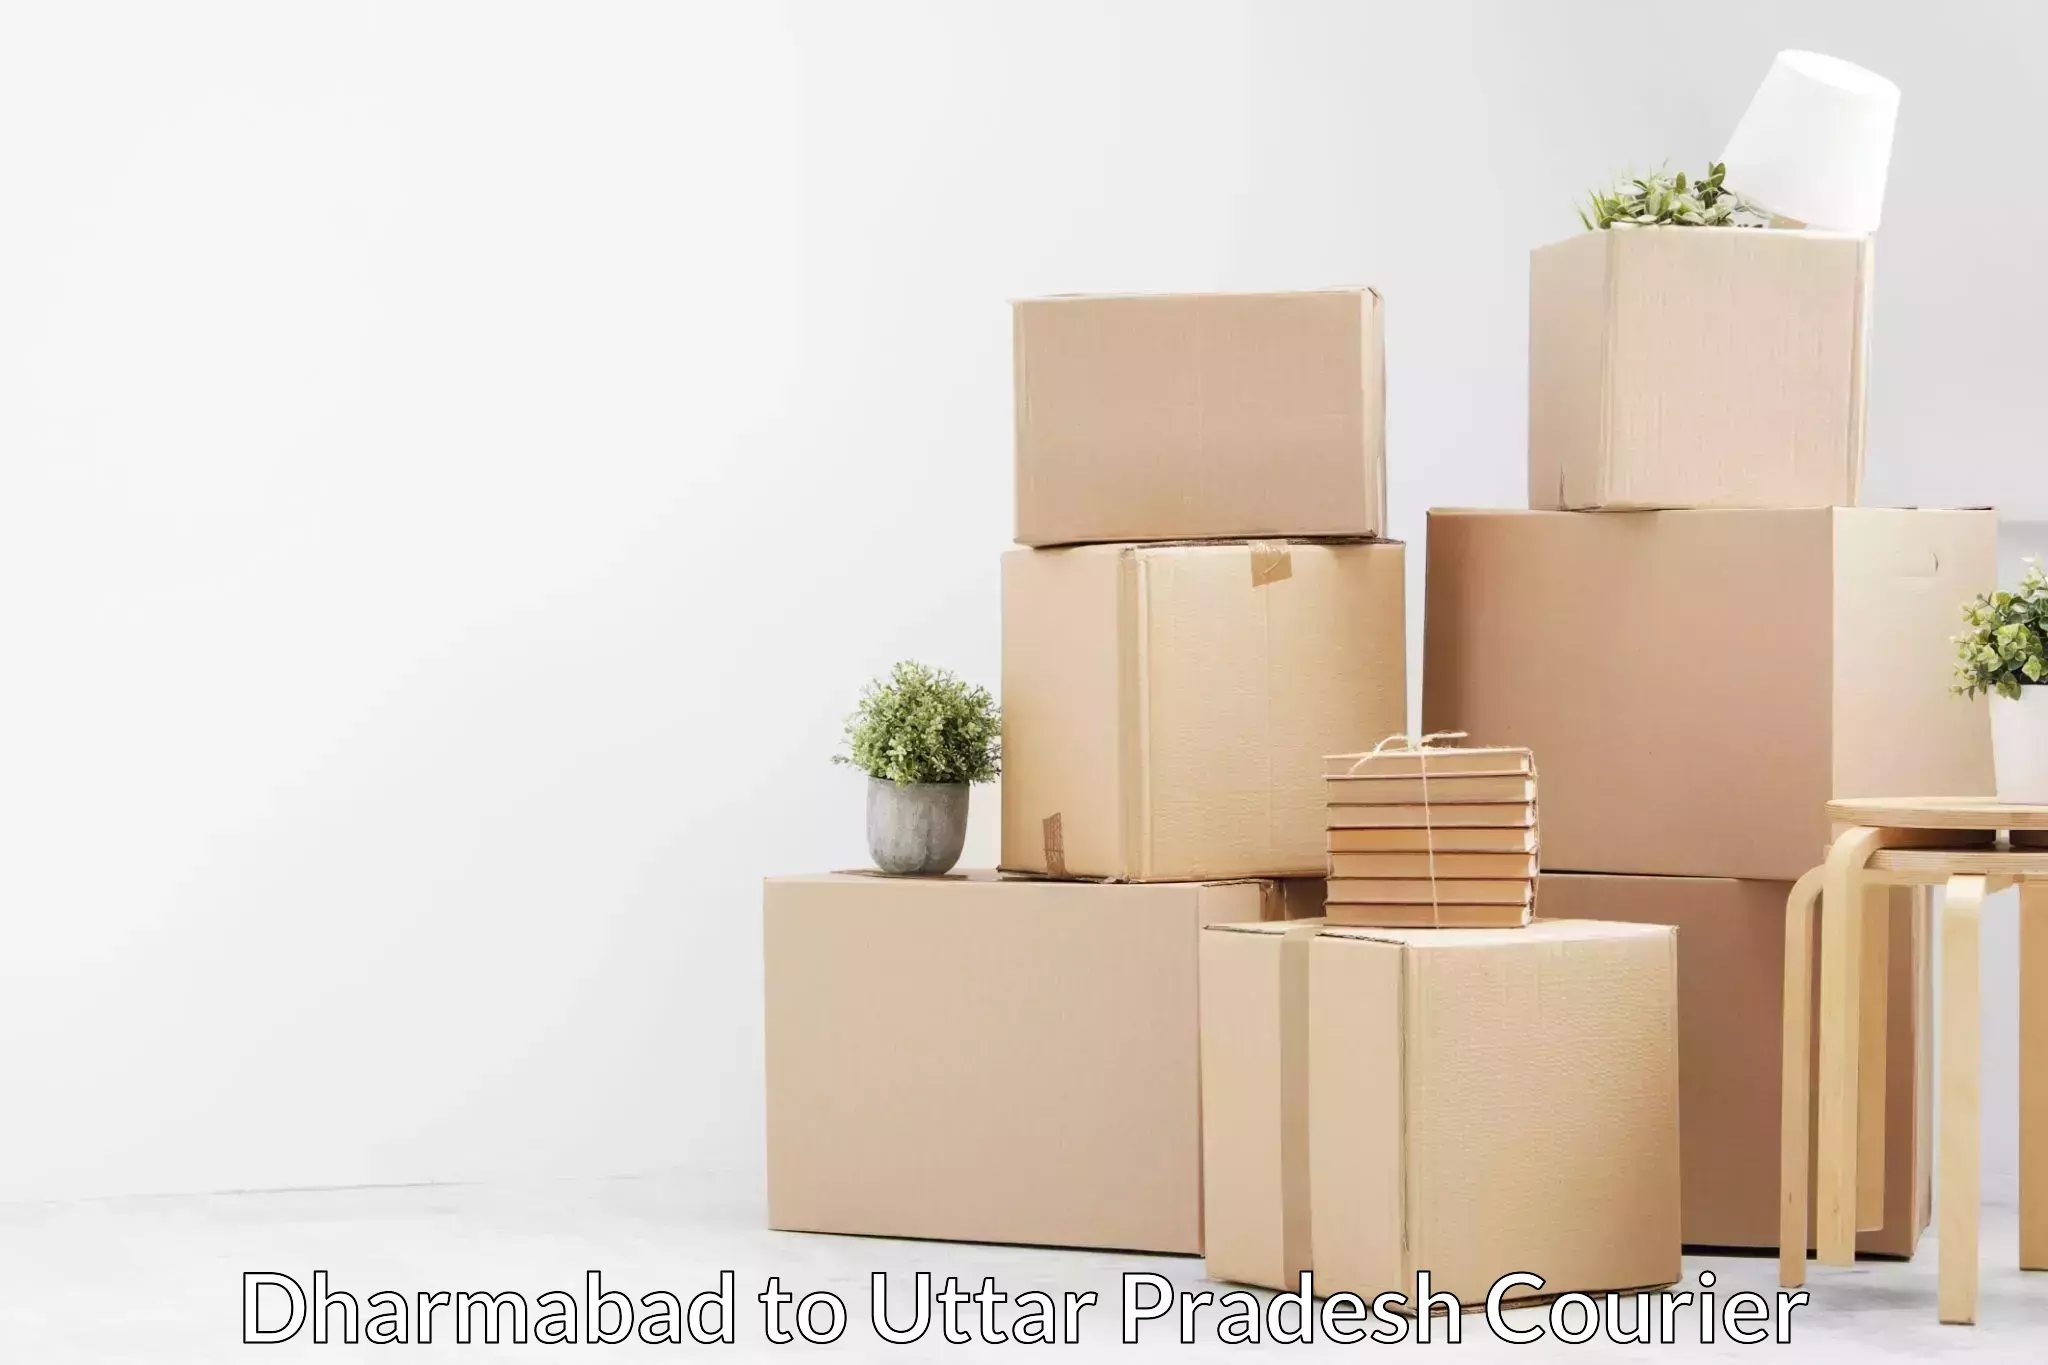 Hassle-free relocation Dharmabad to Khatauli